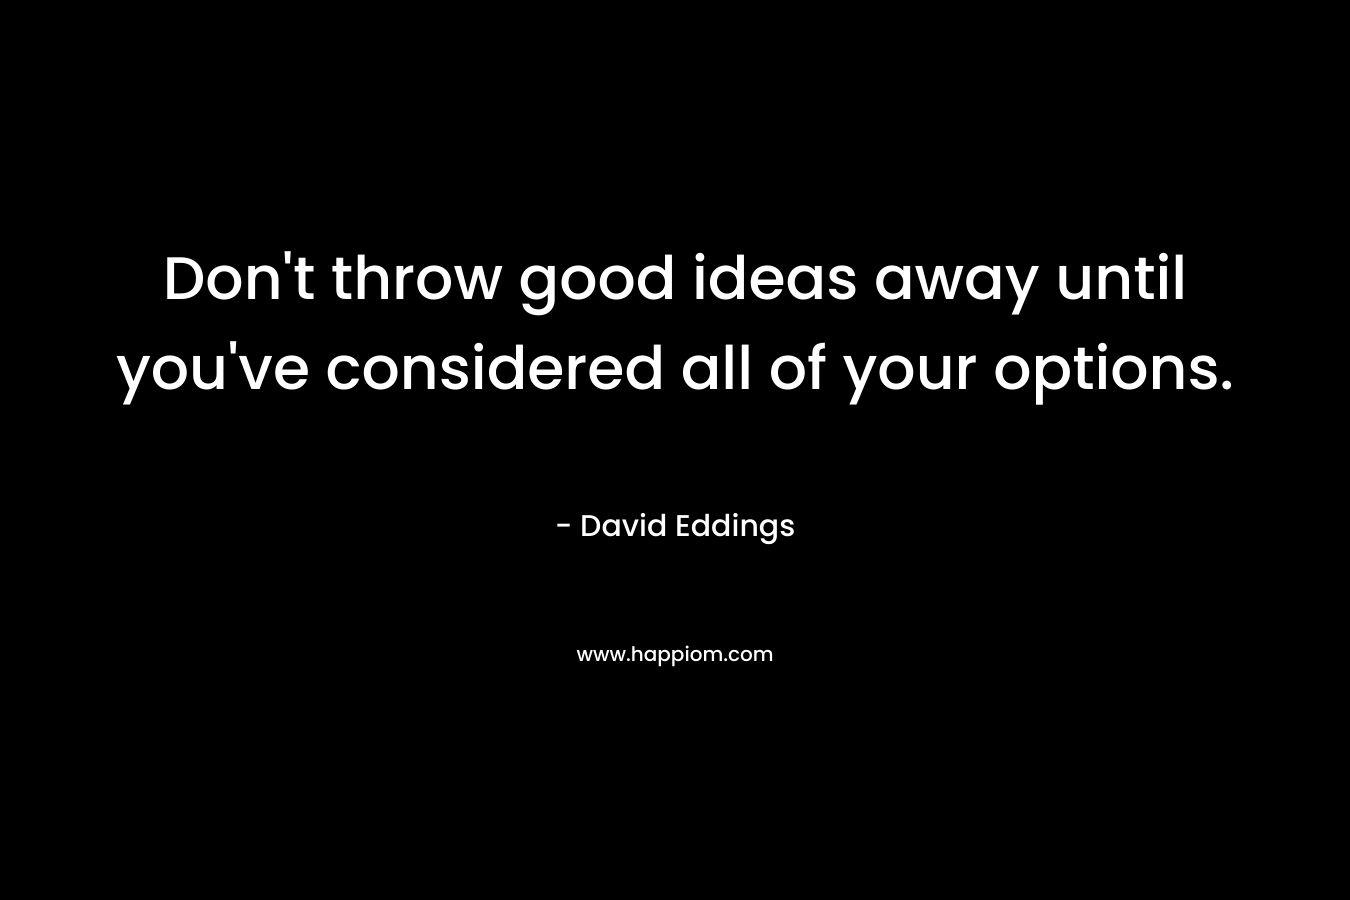 Don't throw good ideas away until you've considered all of your options.